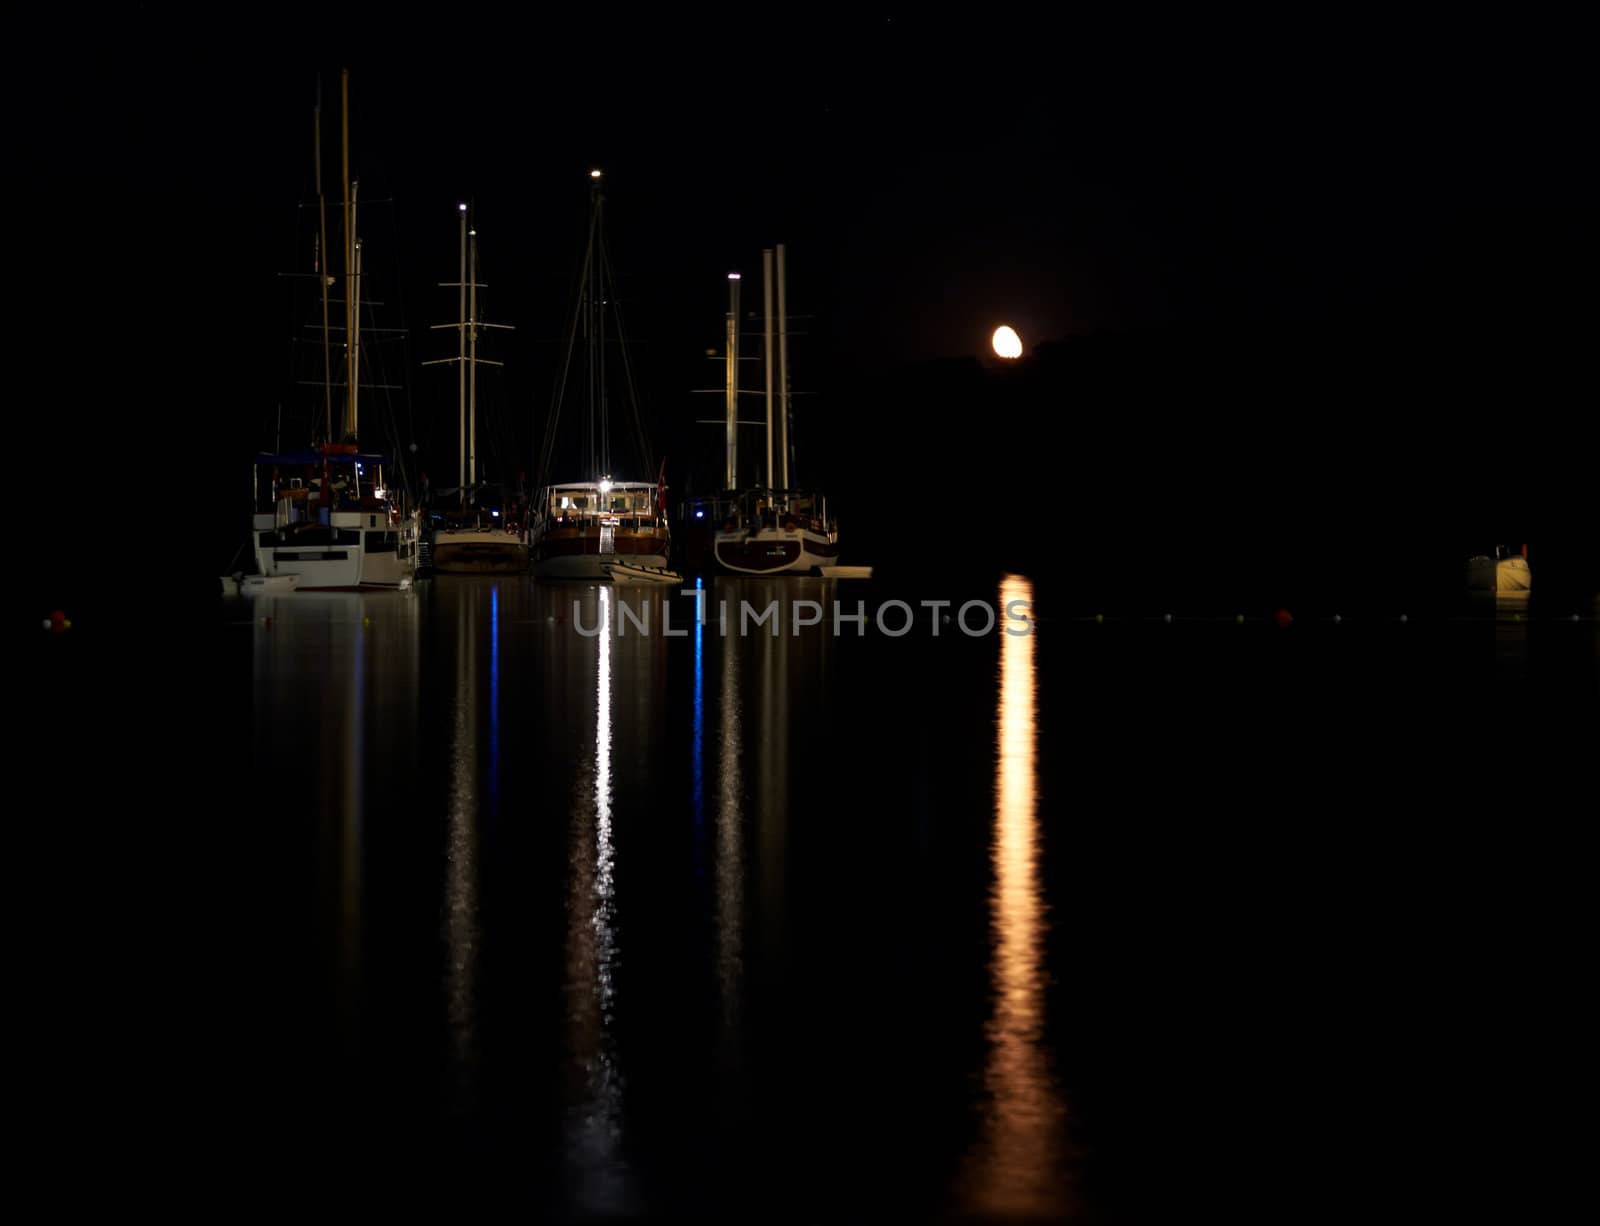 Boats at night with a moon on the dark background